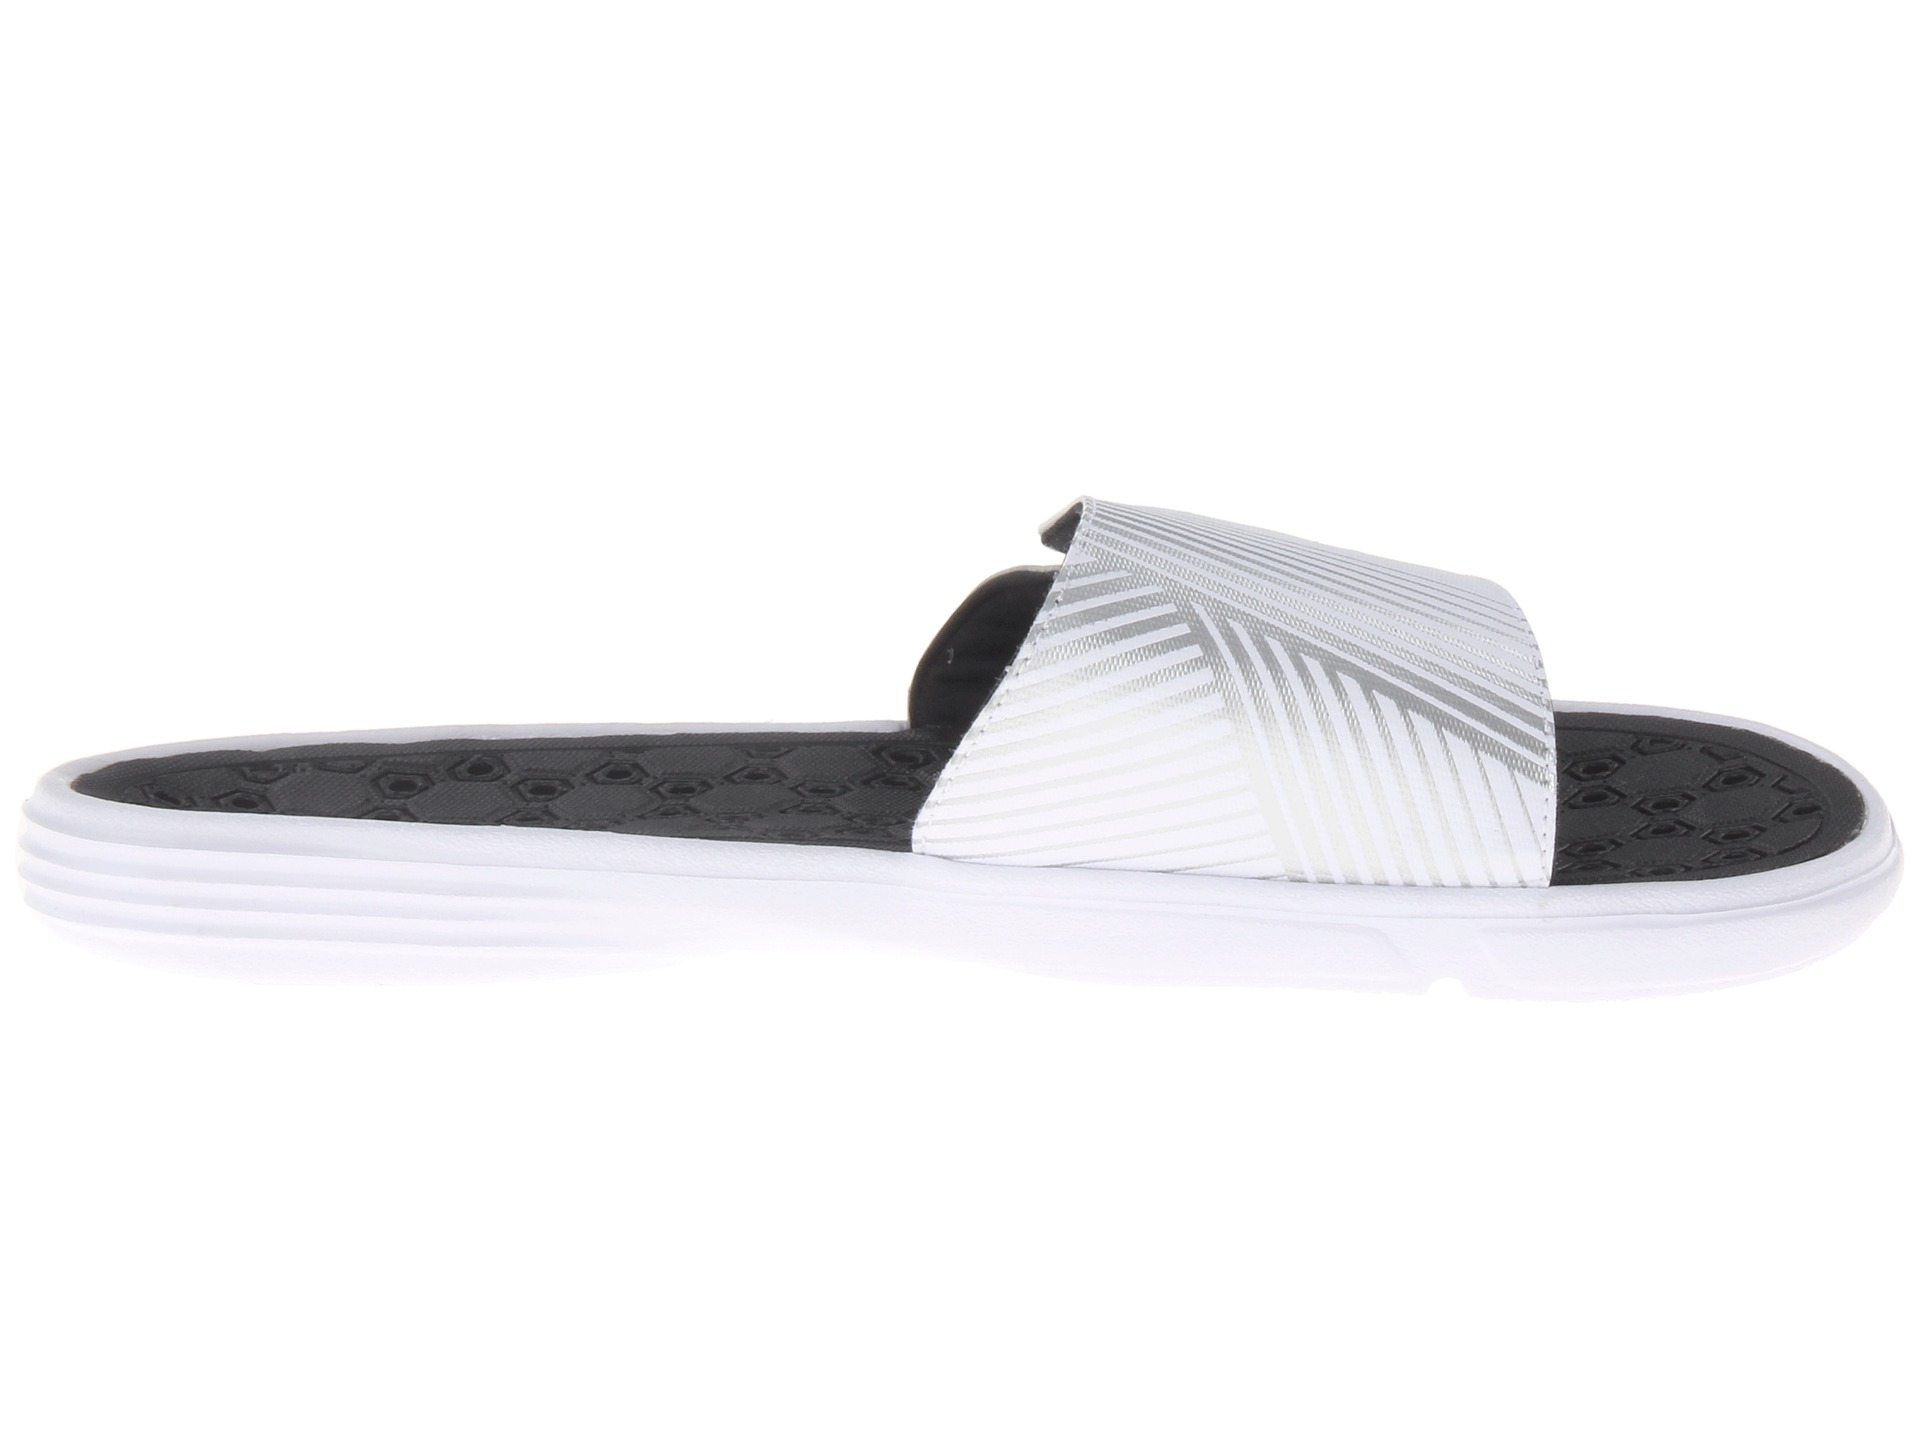 Under Armour Ua M Playmaker Iv Sl White Black | Shipped Free at Zappos